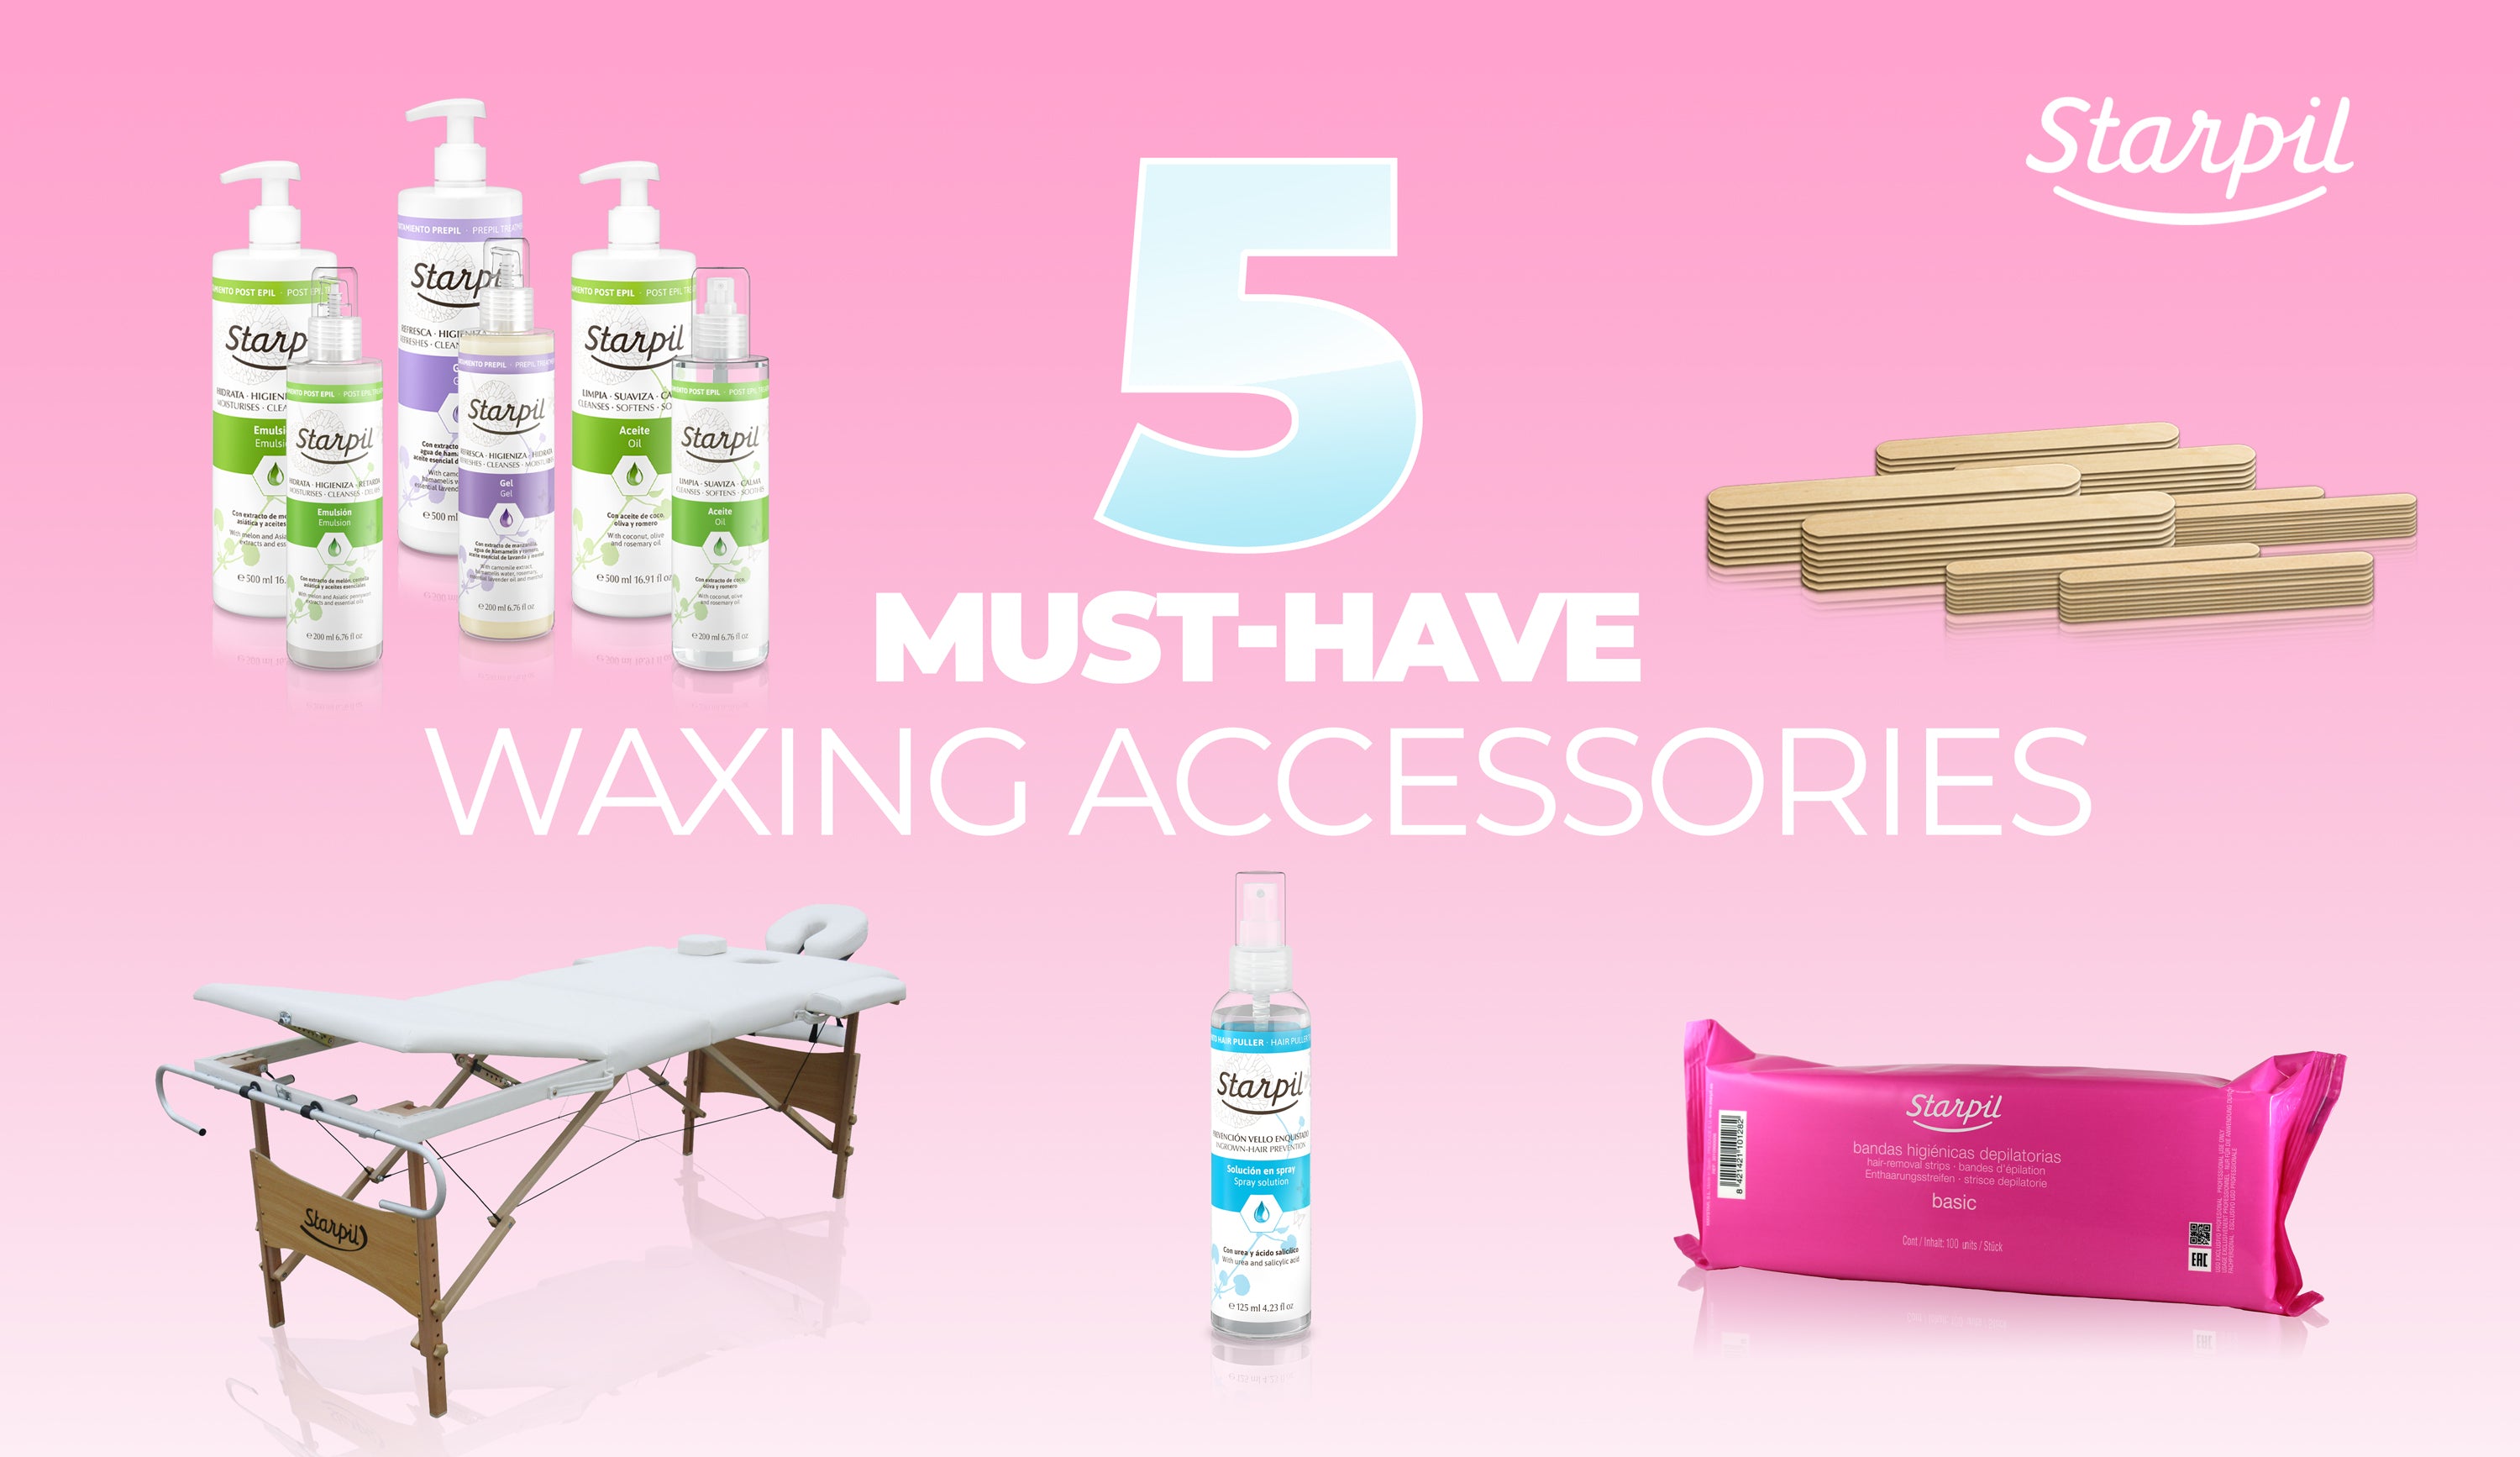 5 Professional Waxing Accessories from Starpil - Must-Have Products!